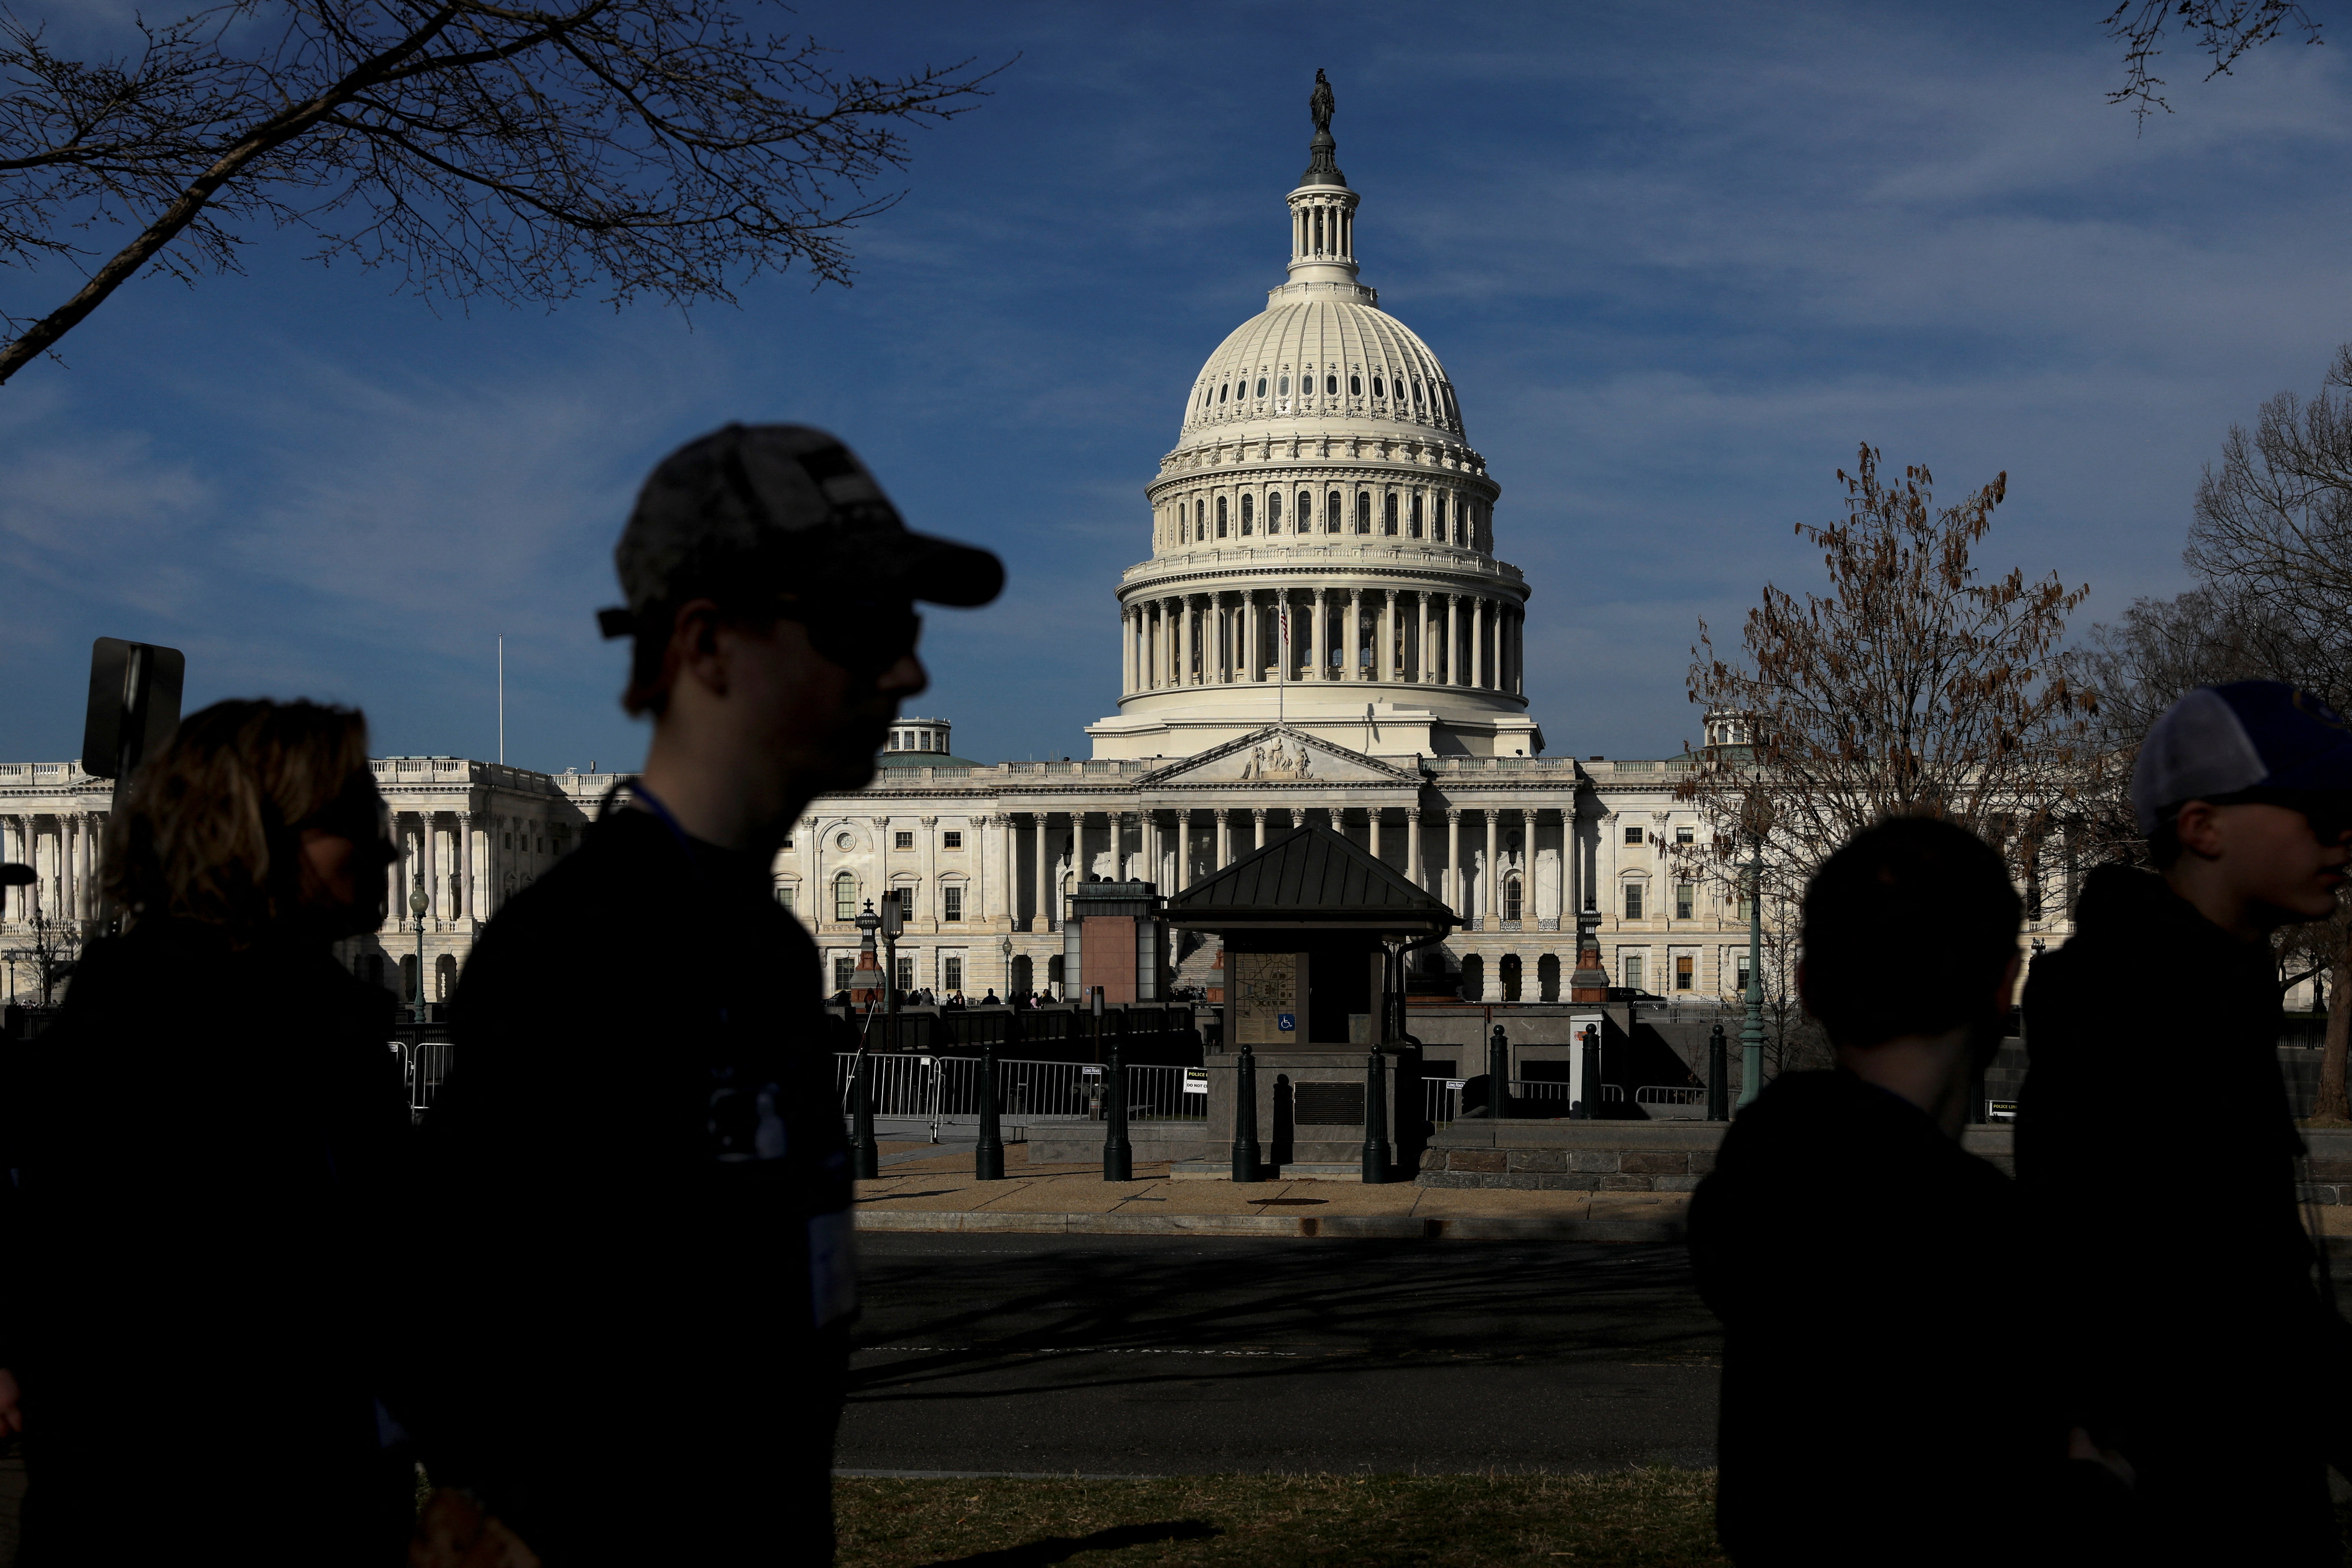 Pedestrians walk by the United States Capitol building in Washington